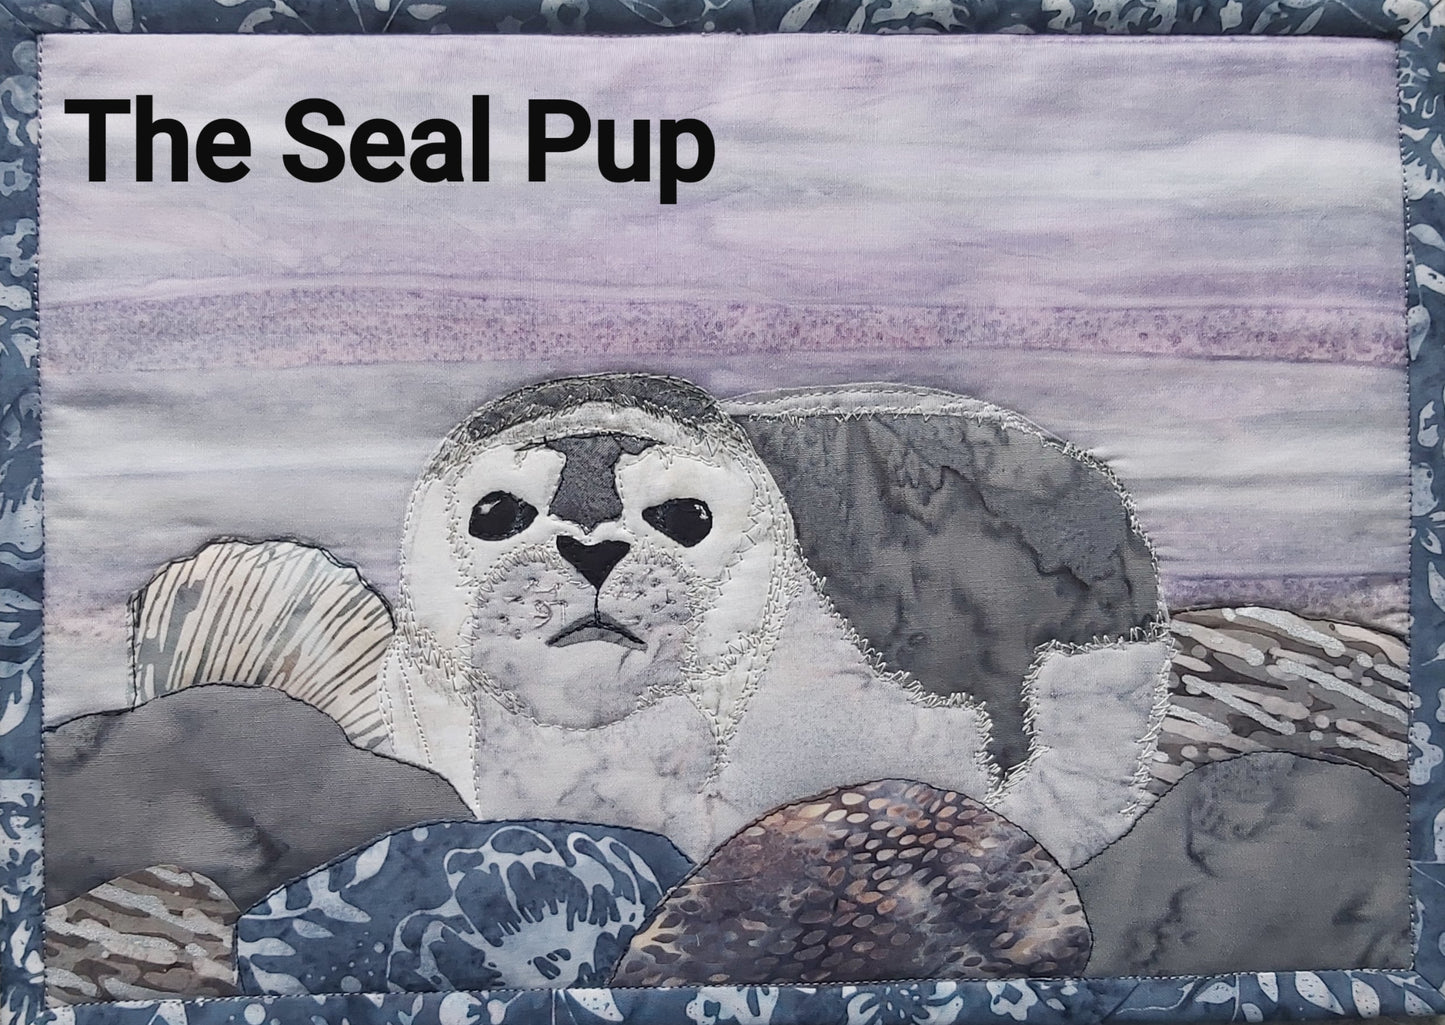 The Seal Pup Journal Quilt Kit or Pattern